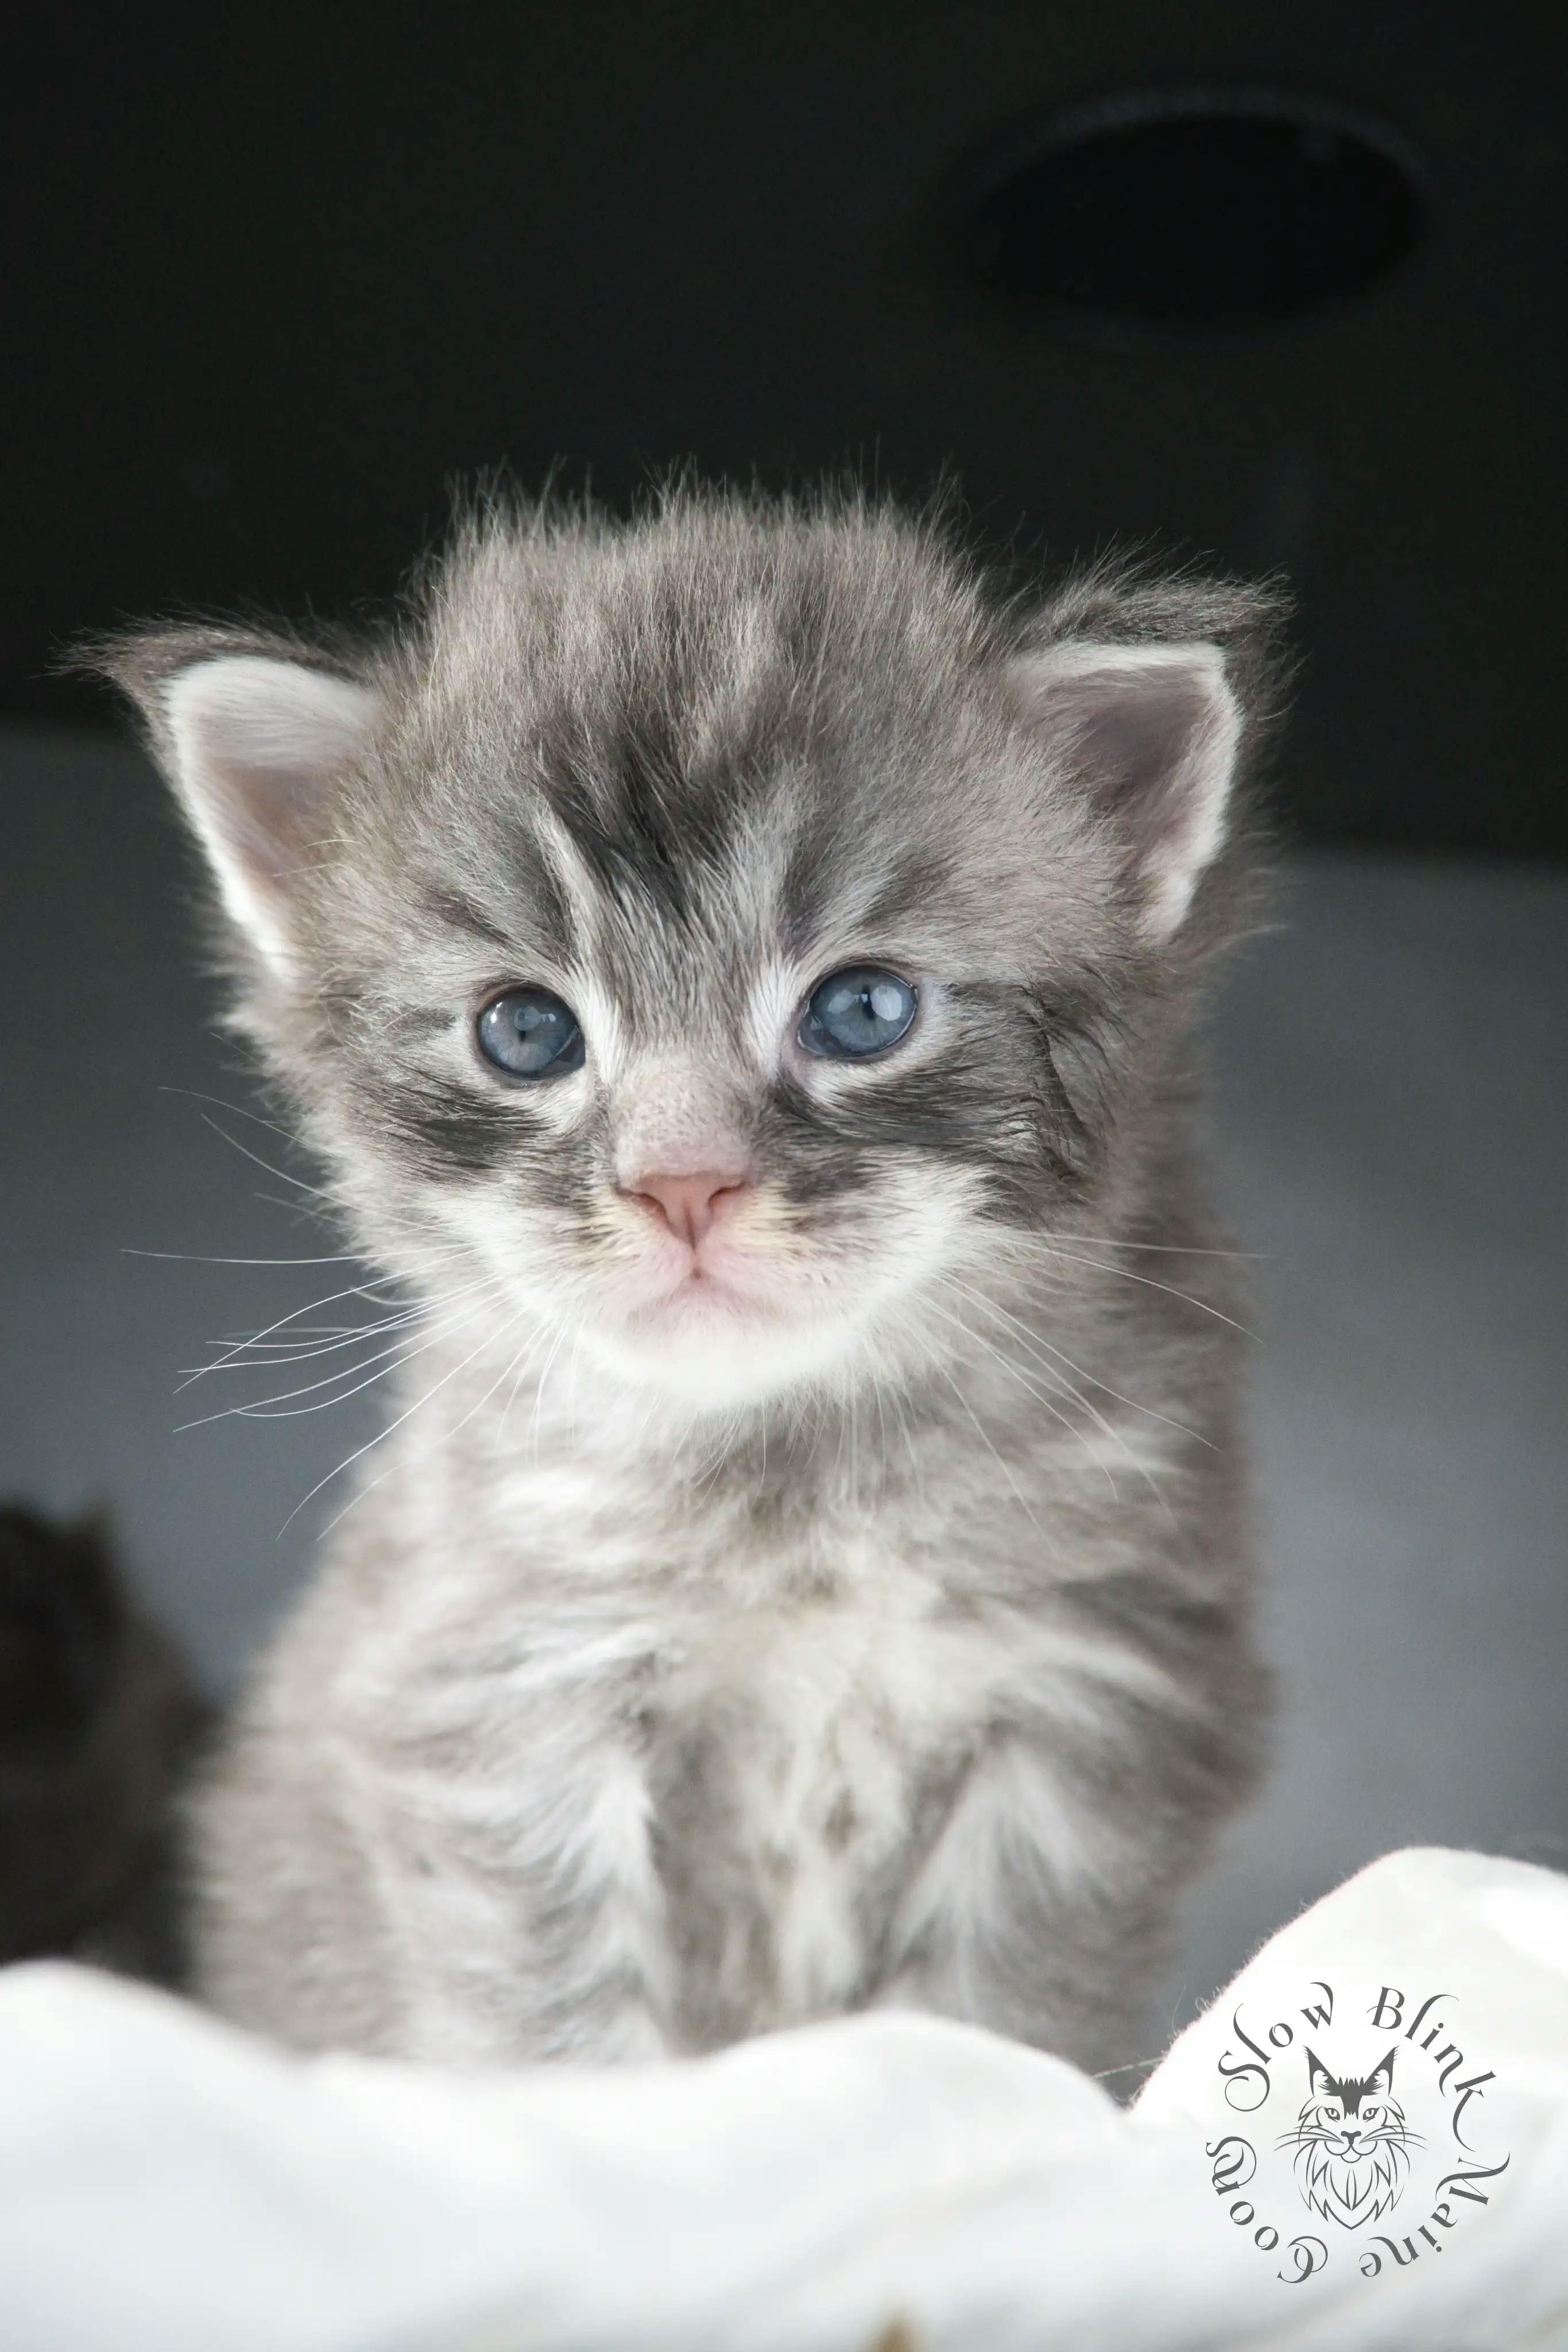 Blue Silver Tabby Maine Coon Kittens > blue silver tabby maine coon kitten | slowblinkmainecoons | 788